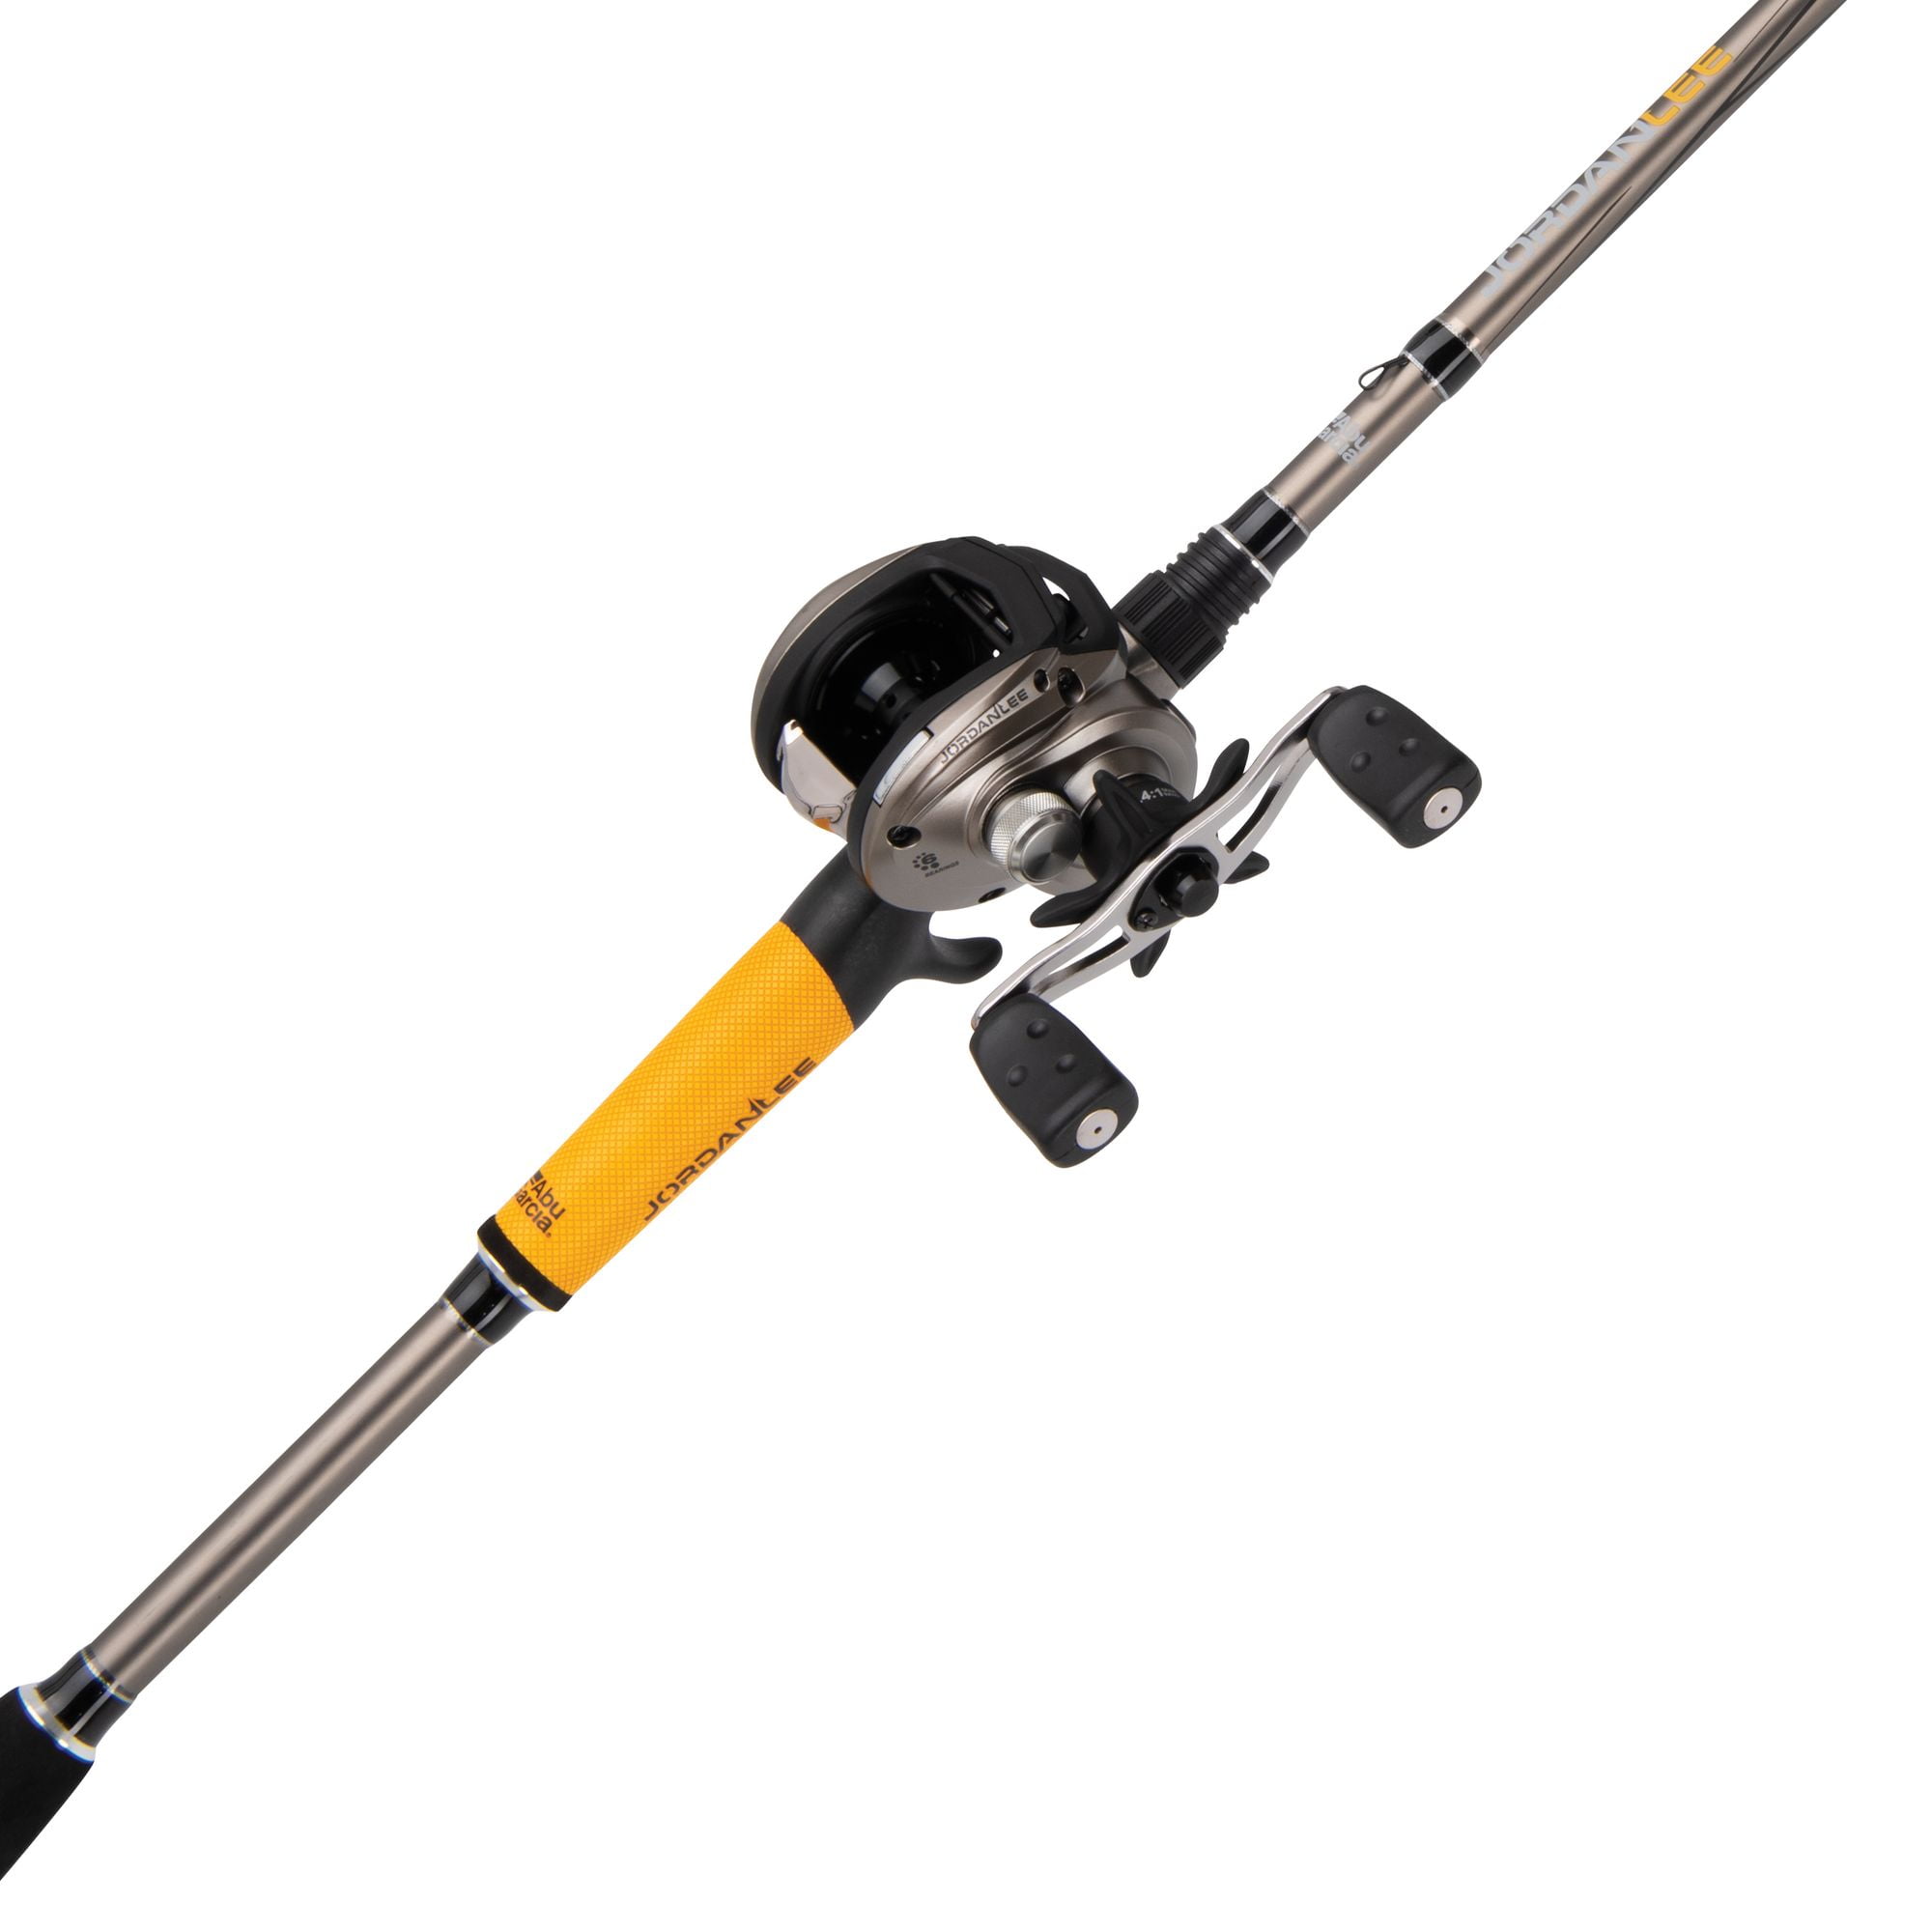 Baitcast rod and reel combo Graphite Rod And 6 Bearing Reel 10 Kg Drag R  Hand